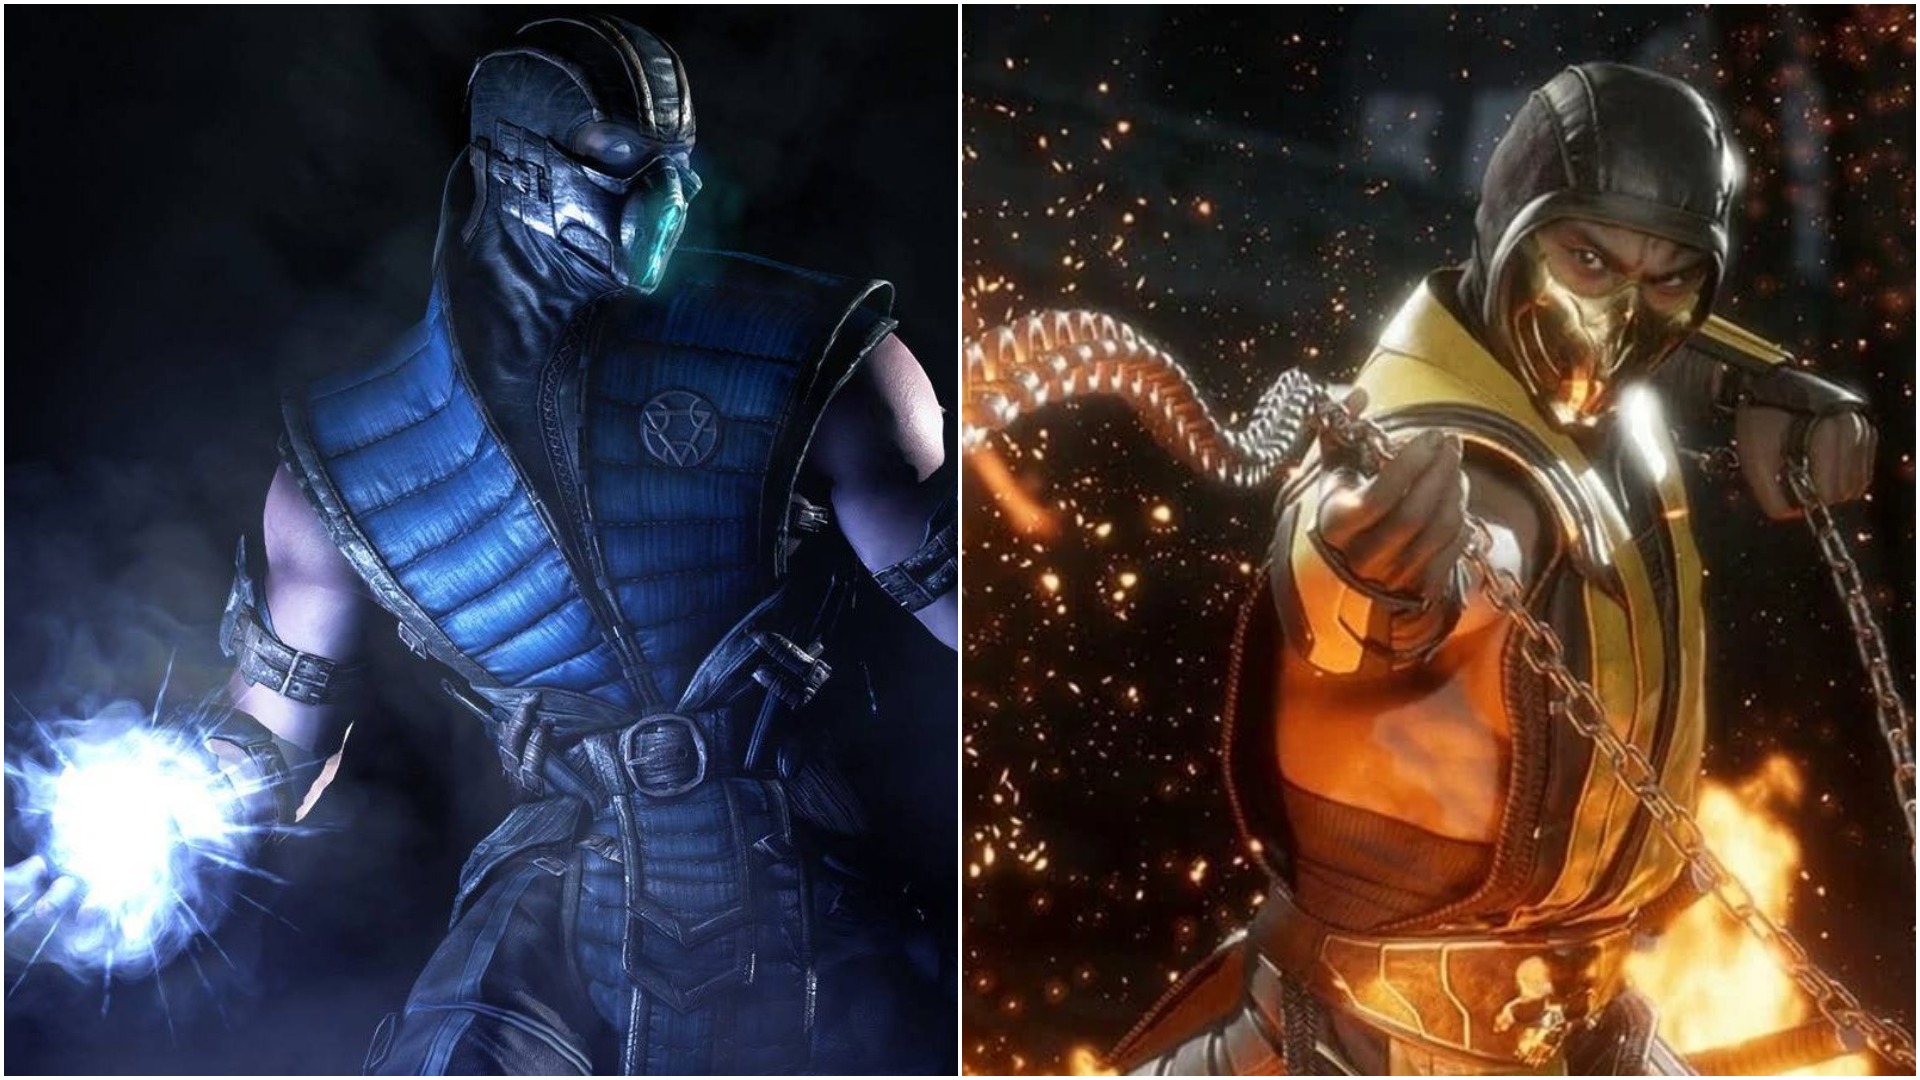 In Mortal Kombat 2021, even if Sub Zero and his group did prevail